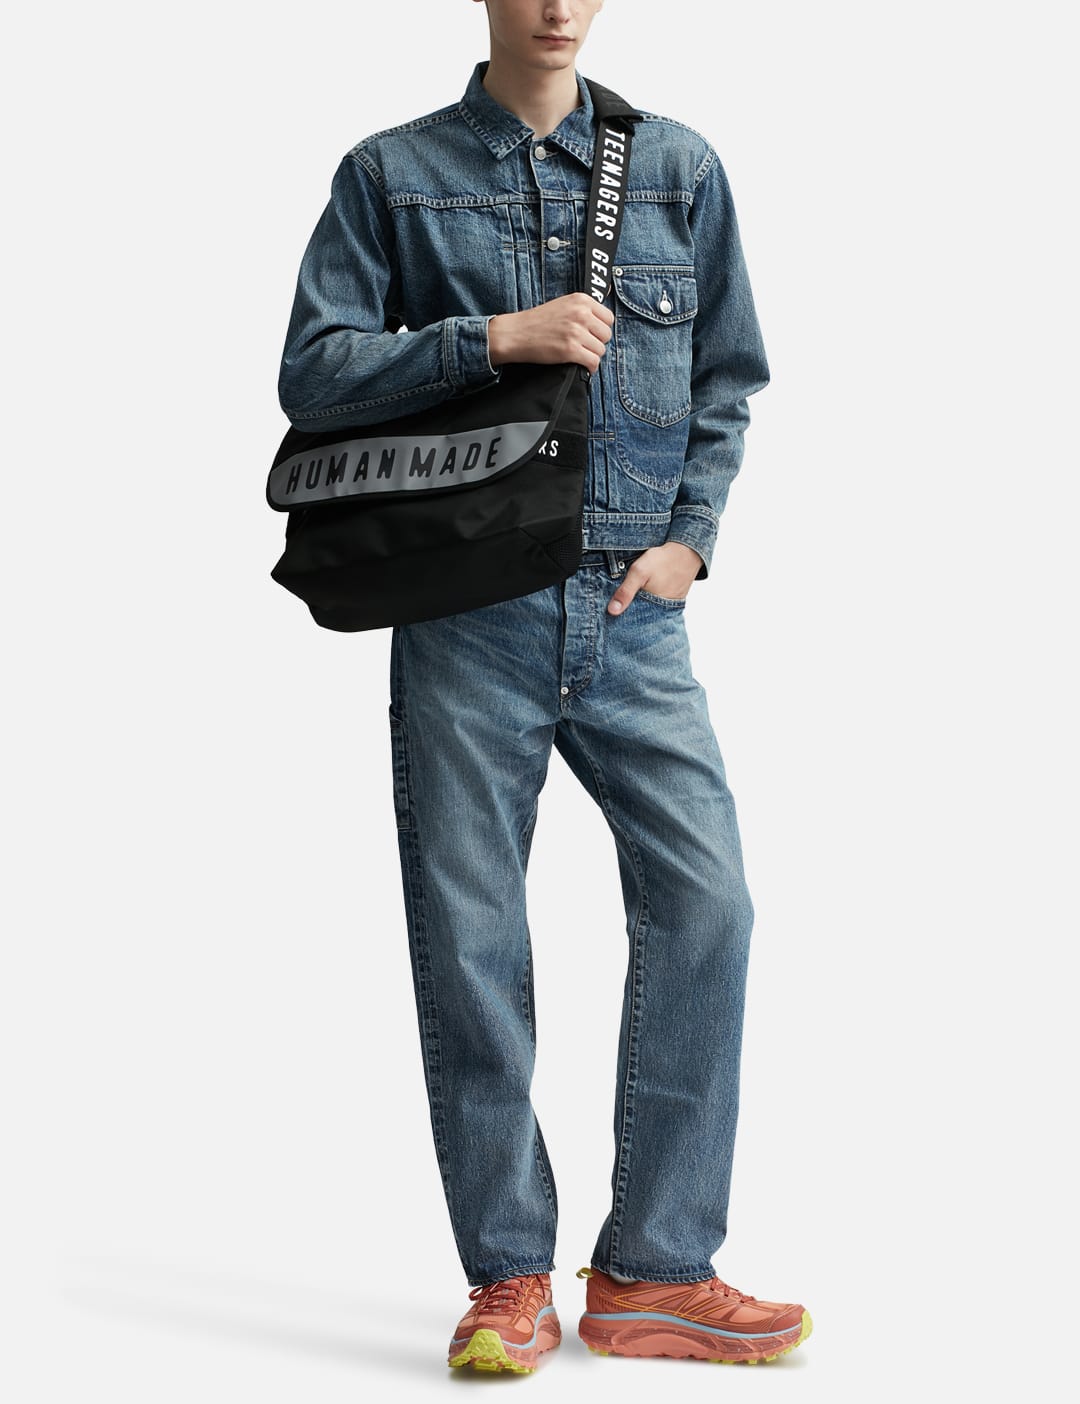 Human Made - MESSENGER BAG LARGE | HBX - Globally Curated Fashion 